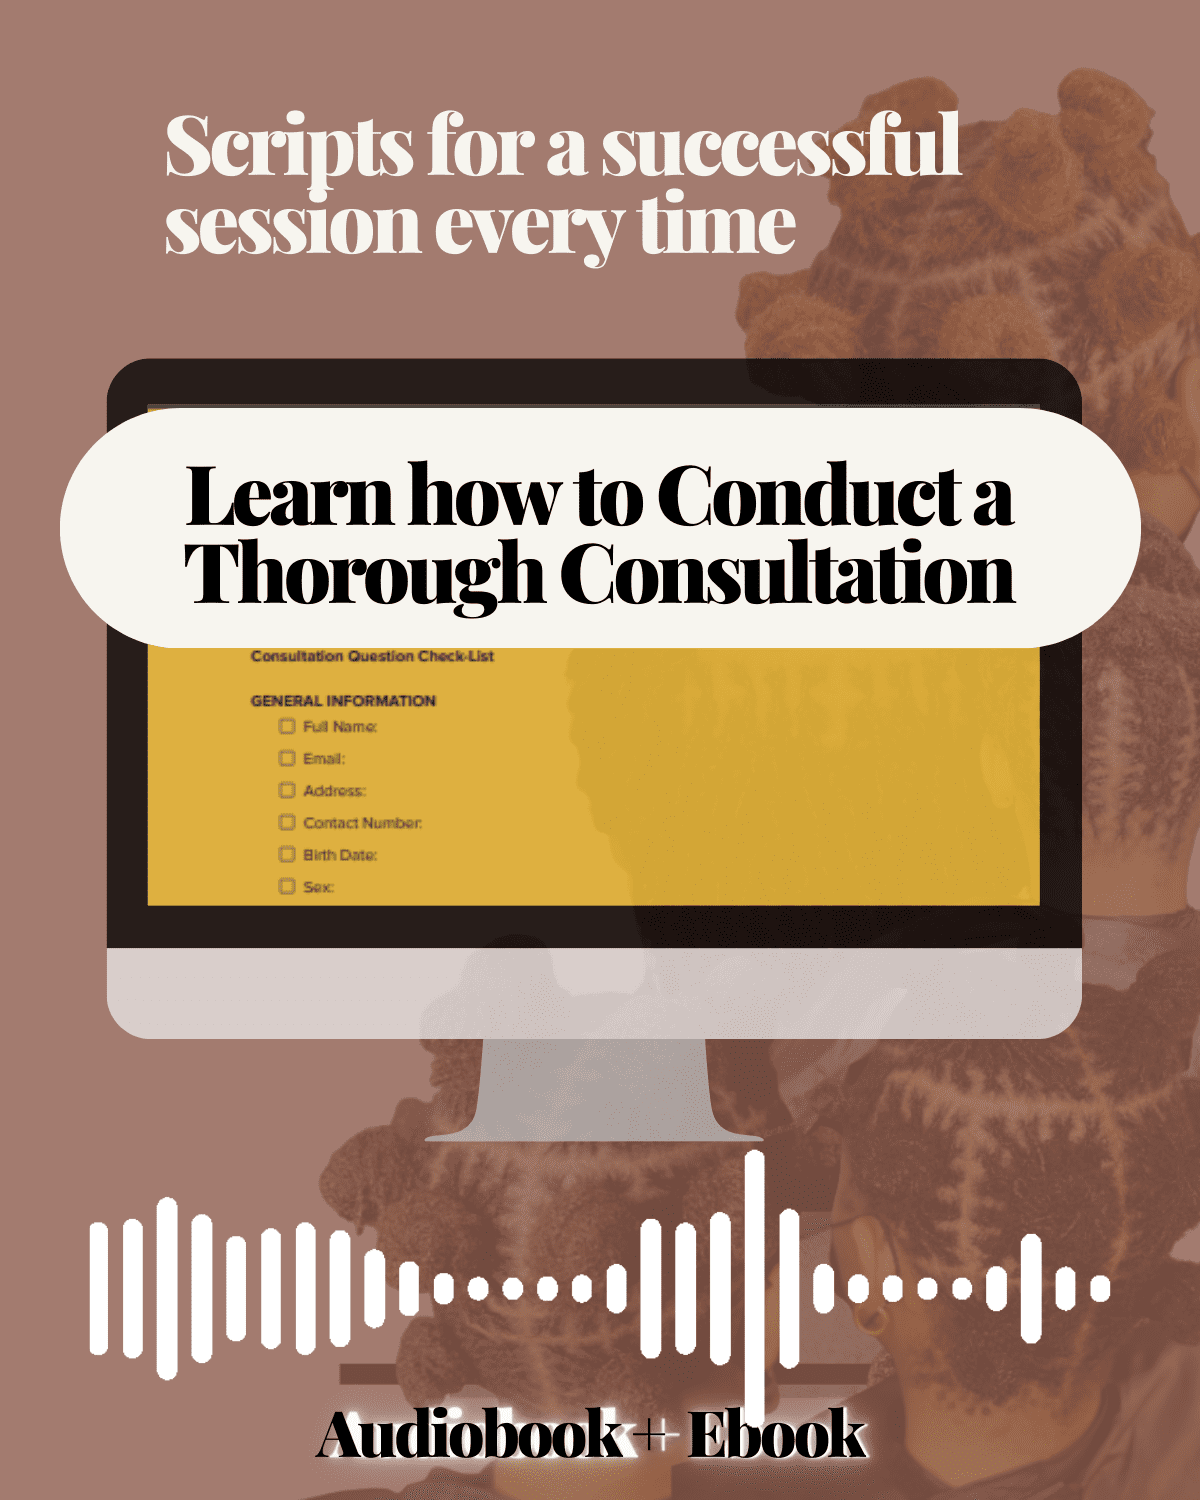 Consultation Handbook: How to Conduct a Thorough Consultation for Success Every Time